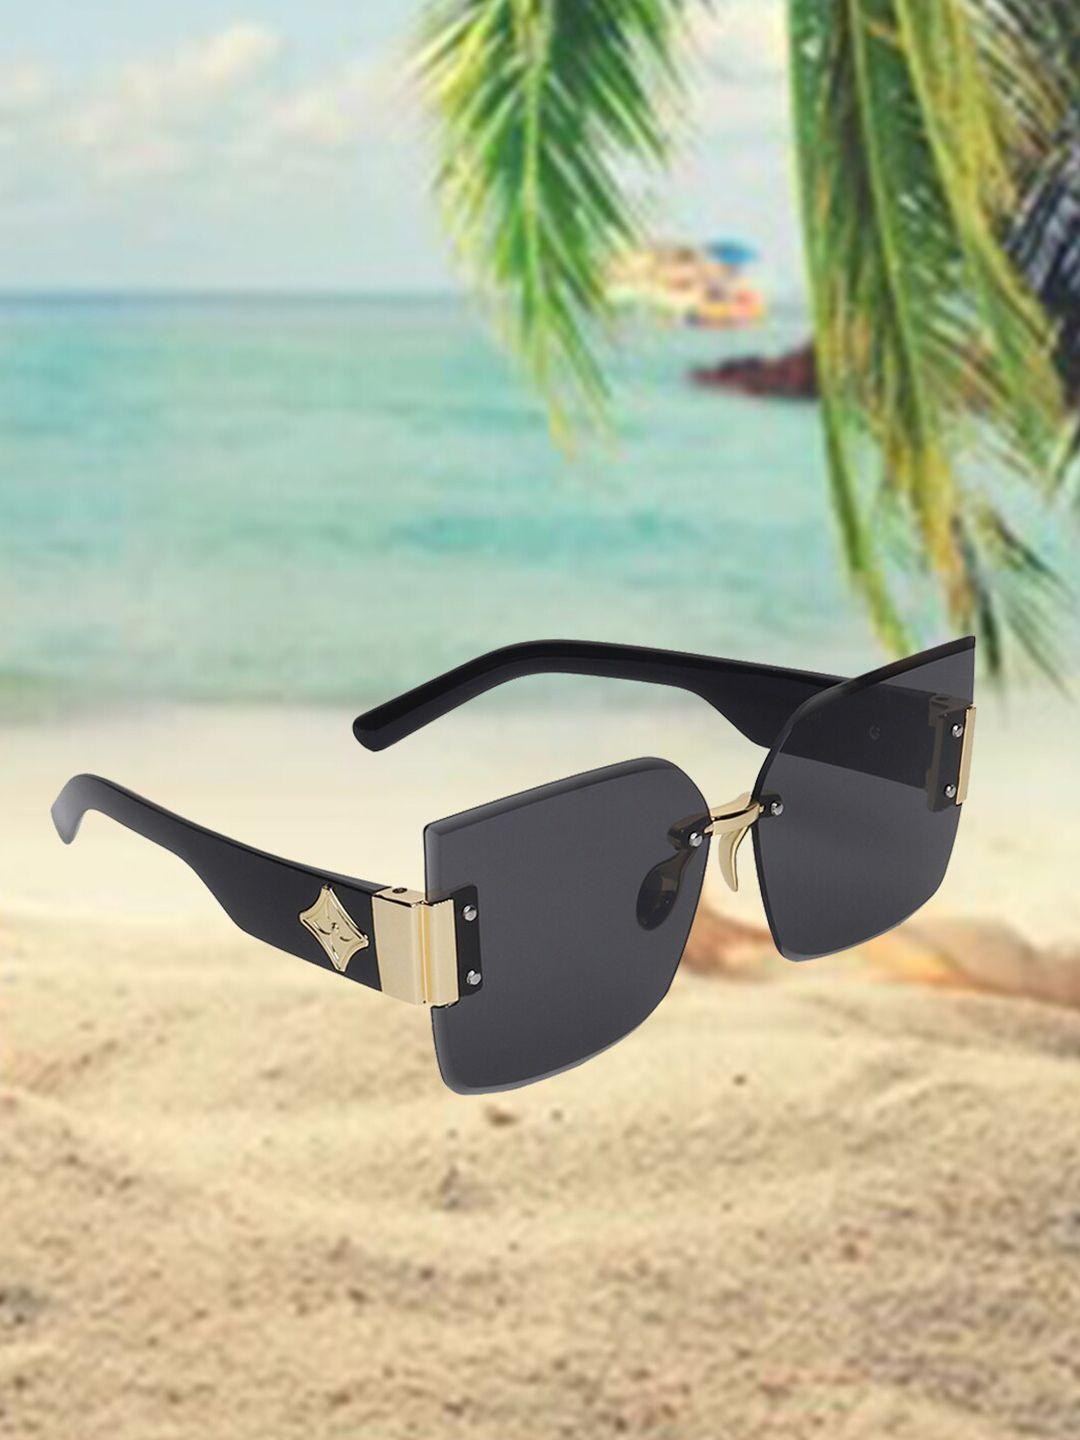 celebrity sunglasses lens & square sunglasses with uv protected lens